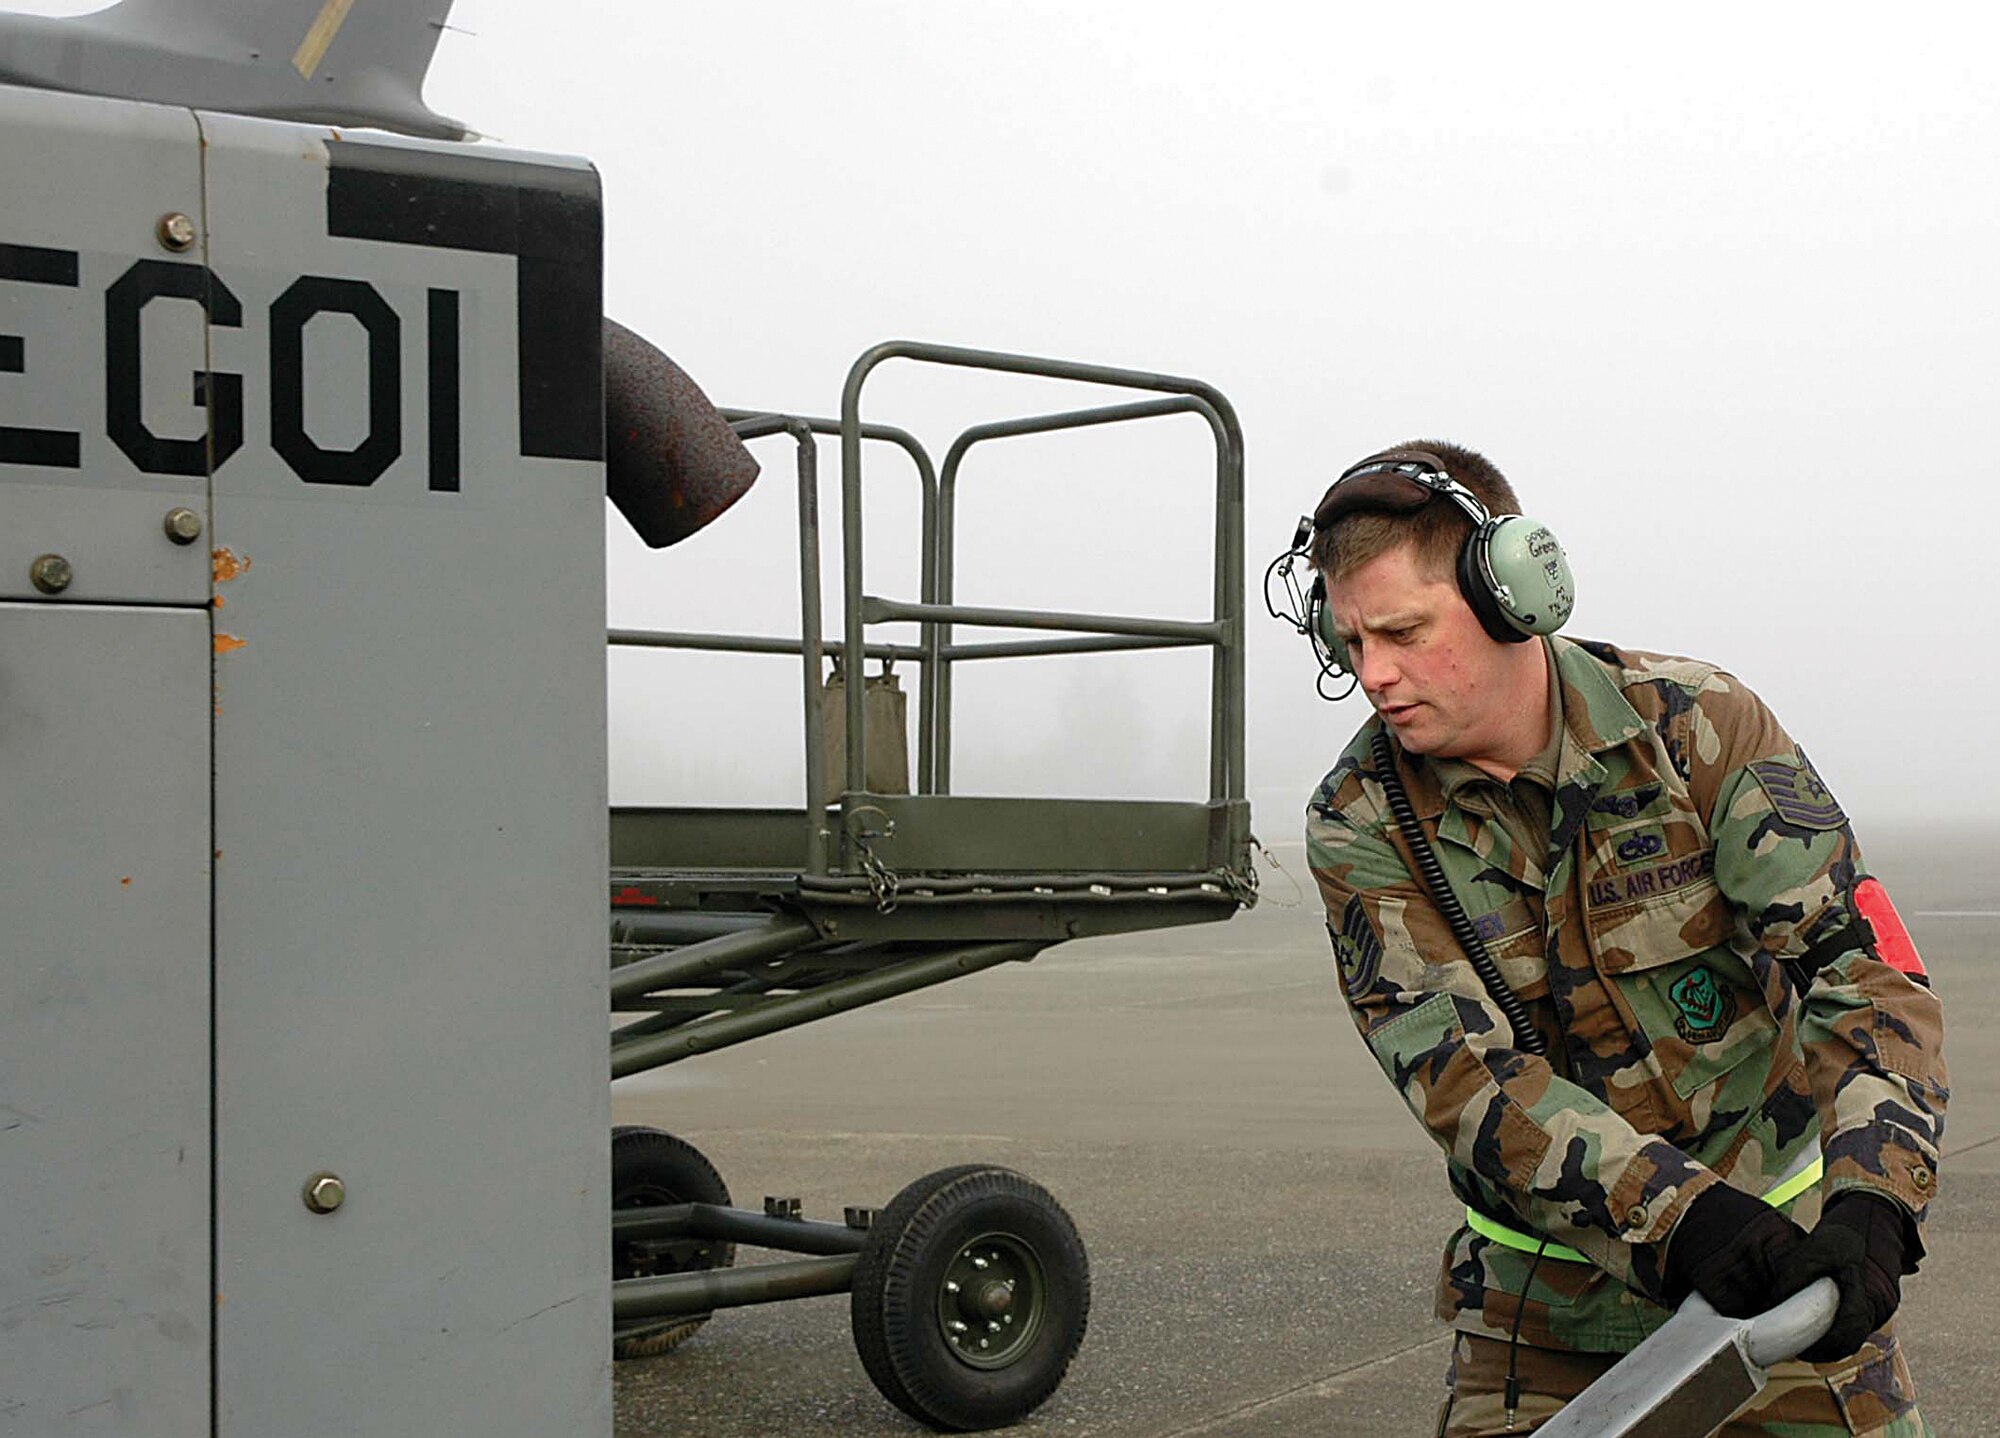 Tech. Sgt. Ray Green moves equipment into position while waiting for the morning fog to burn off at McChord Air Force Base, Wash., and clear the flightline so planes can take off.  Sergeant Green is an Air Force Reserve C-17 crew chief with the 446th Aircraft Maintenance Squadron here. (U.S. Air Force photo/Airman First Class Patrick Cabellon)